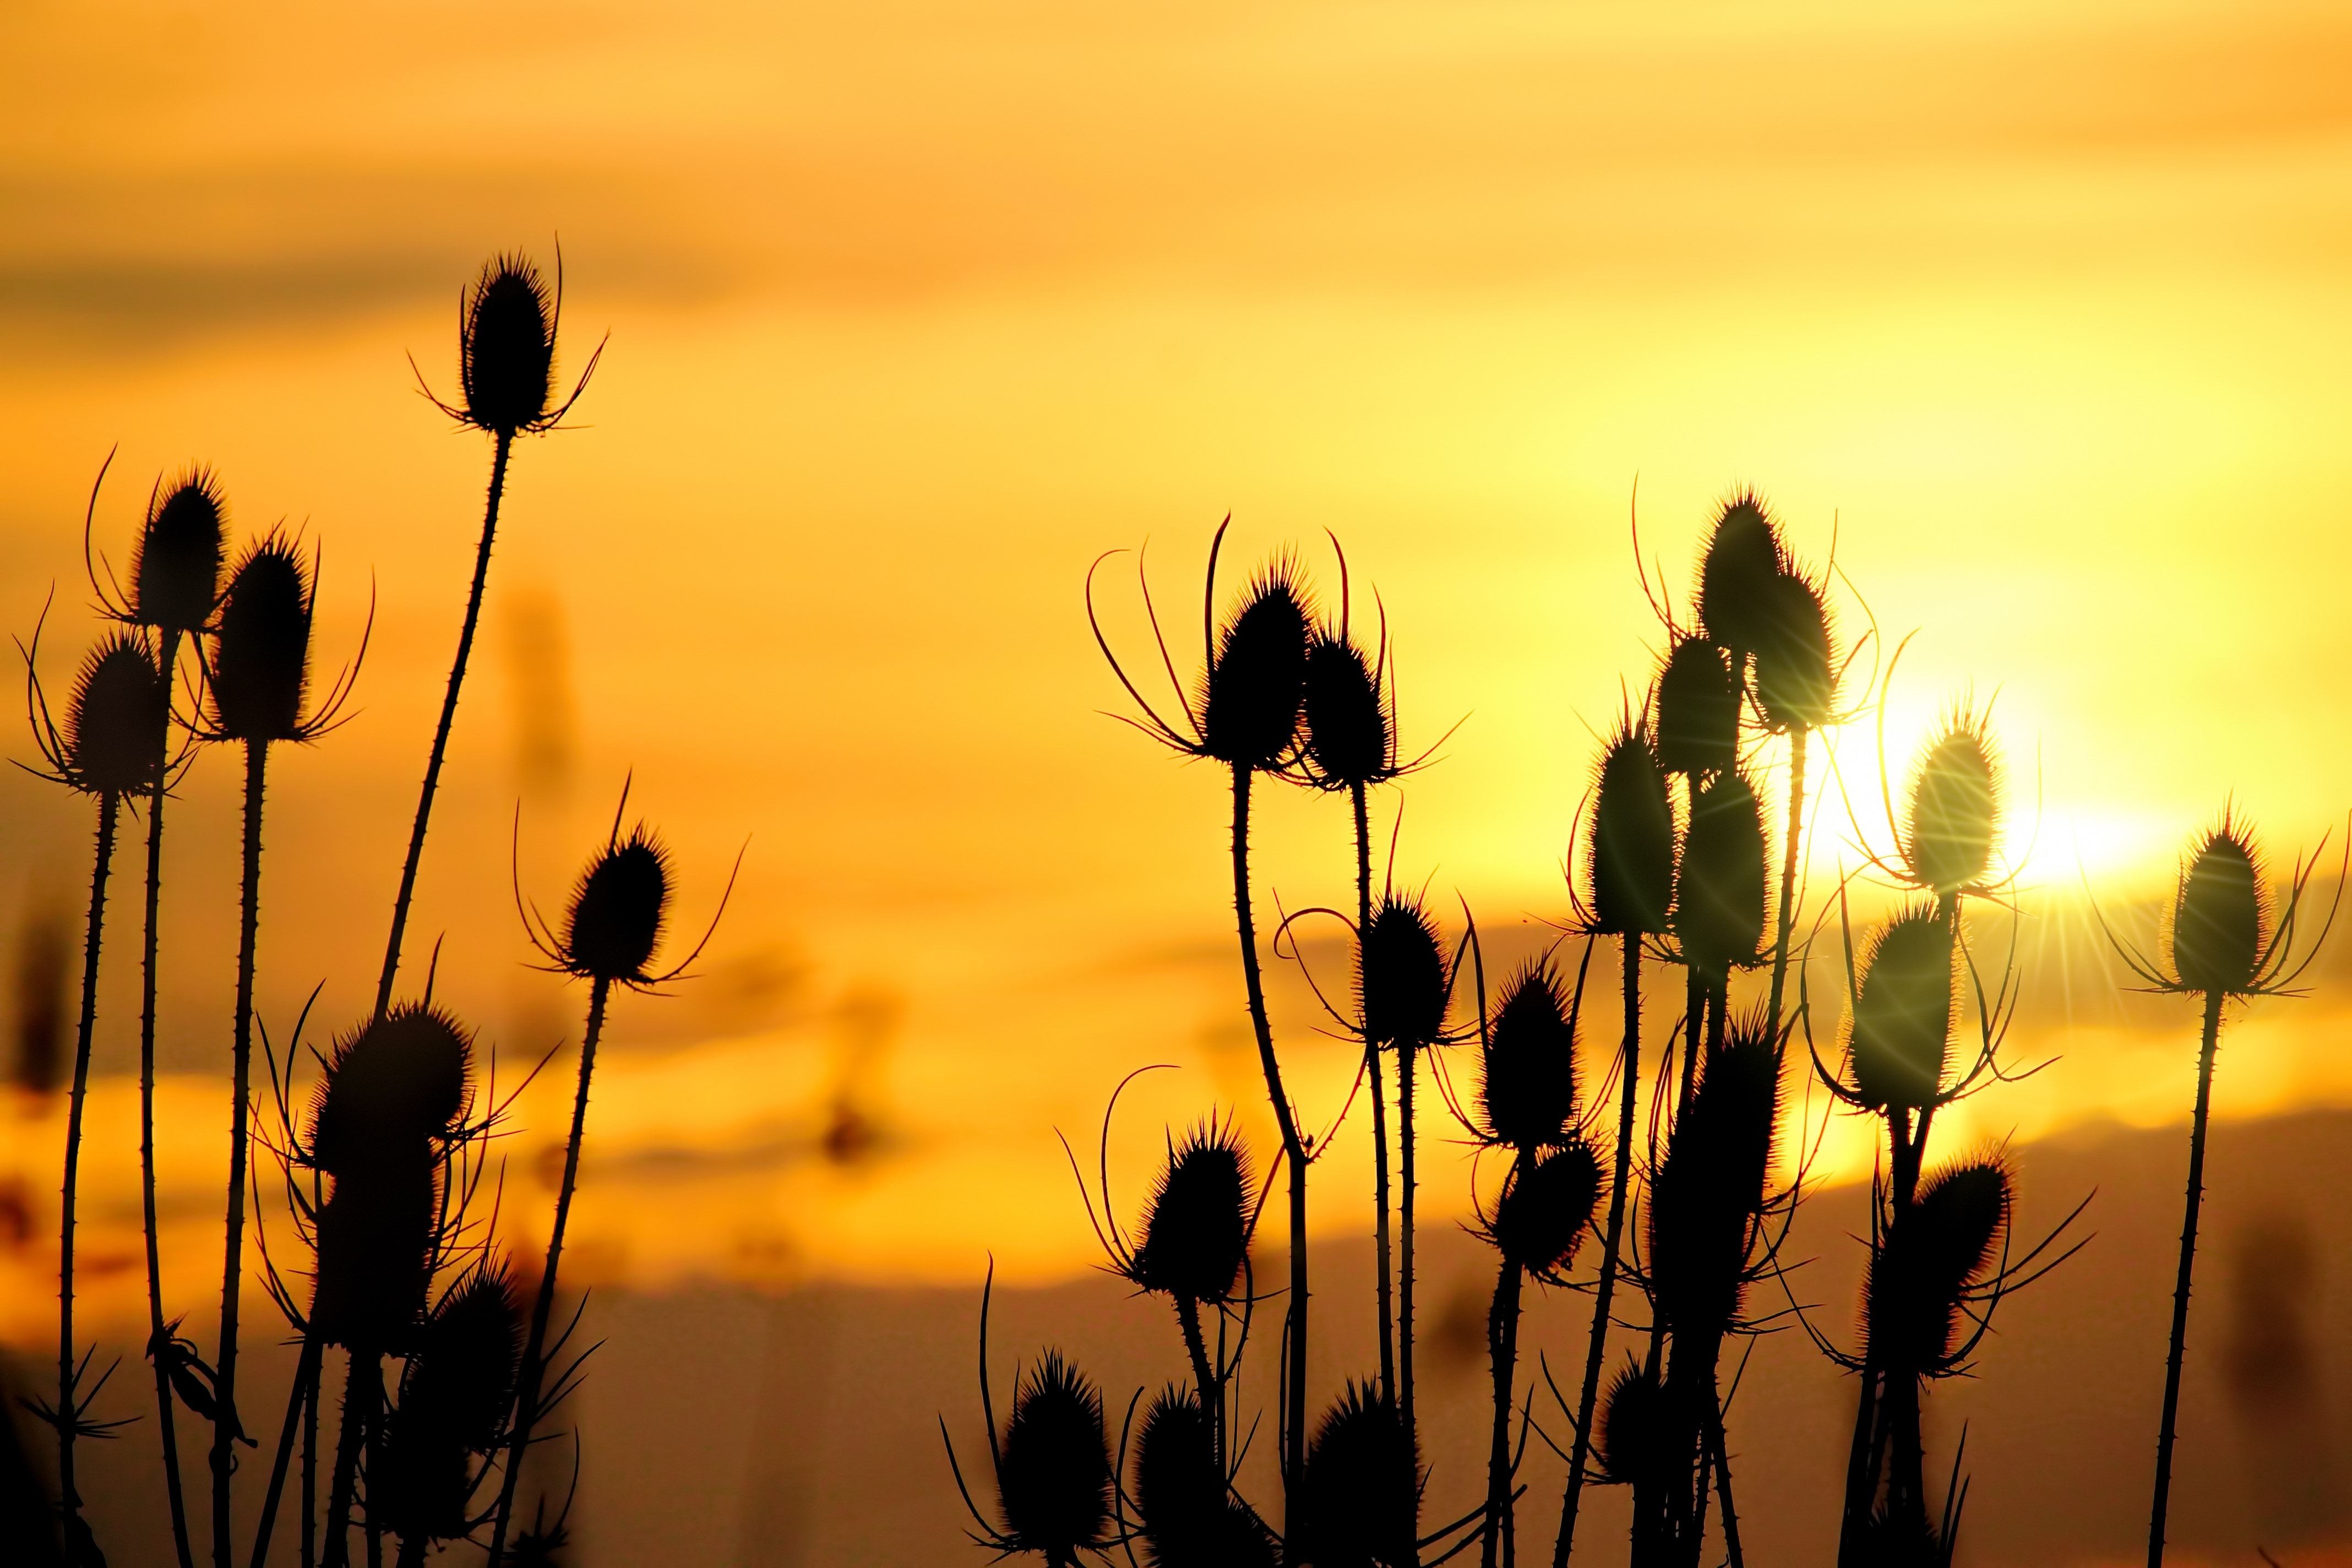 flower silhouette at golden hour